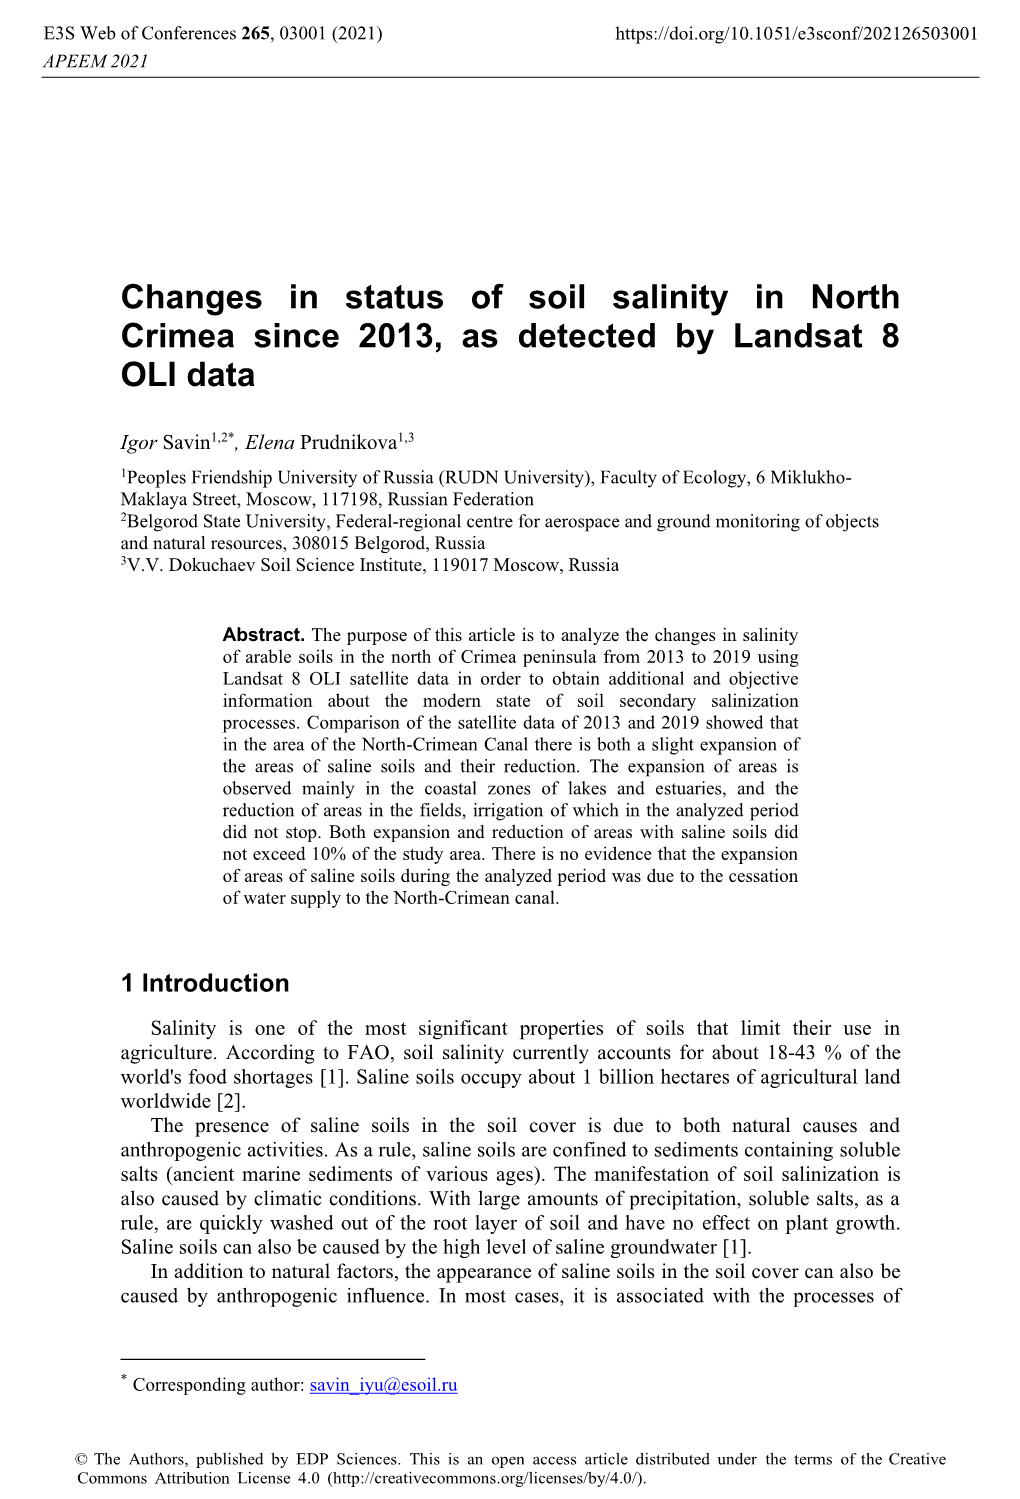 Changes in Status of Soil Salinity in North Crimea Since 2013, As Detected by Landsat 8 OLI Data